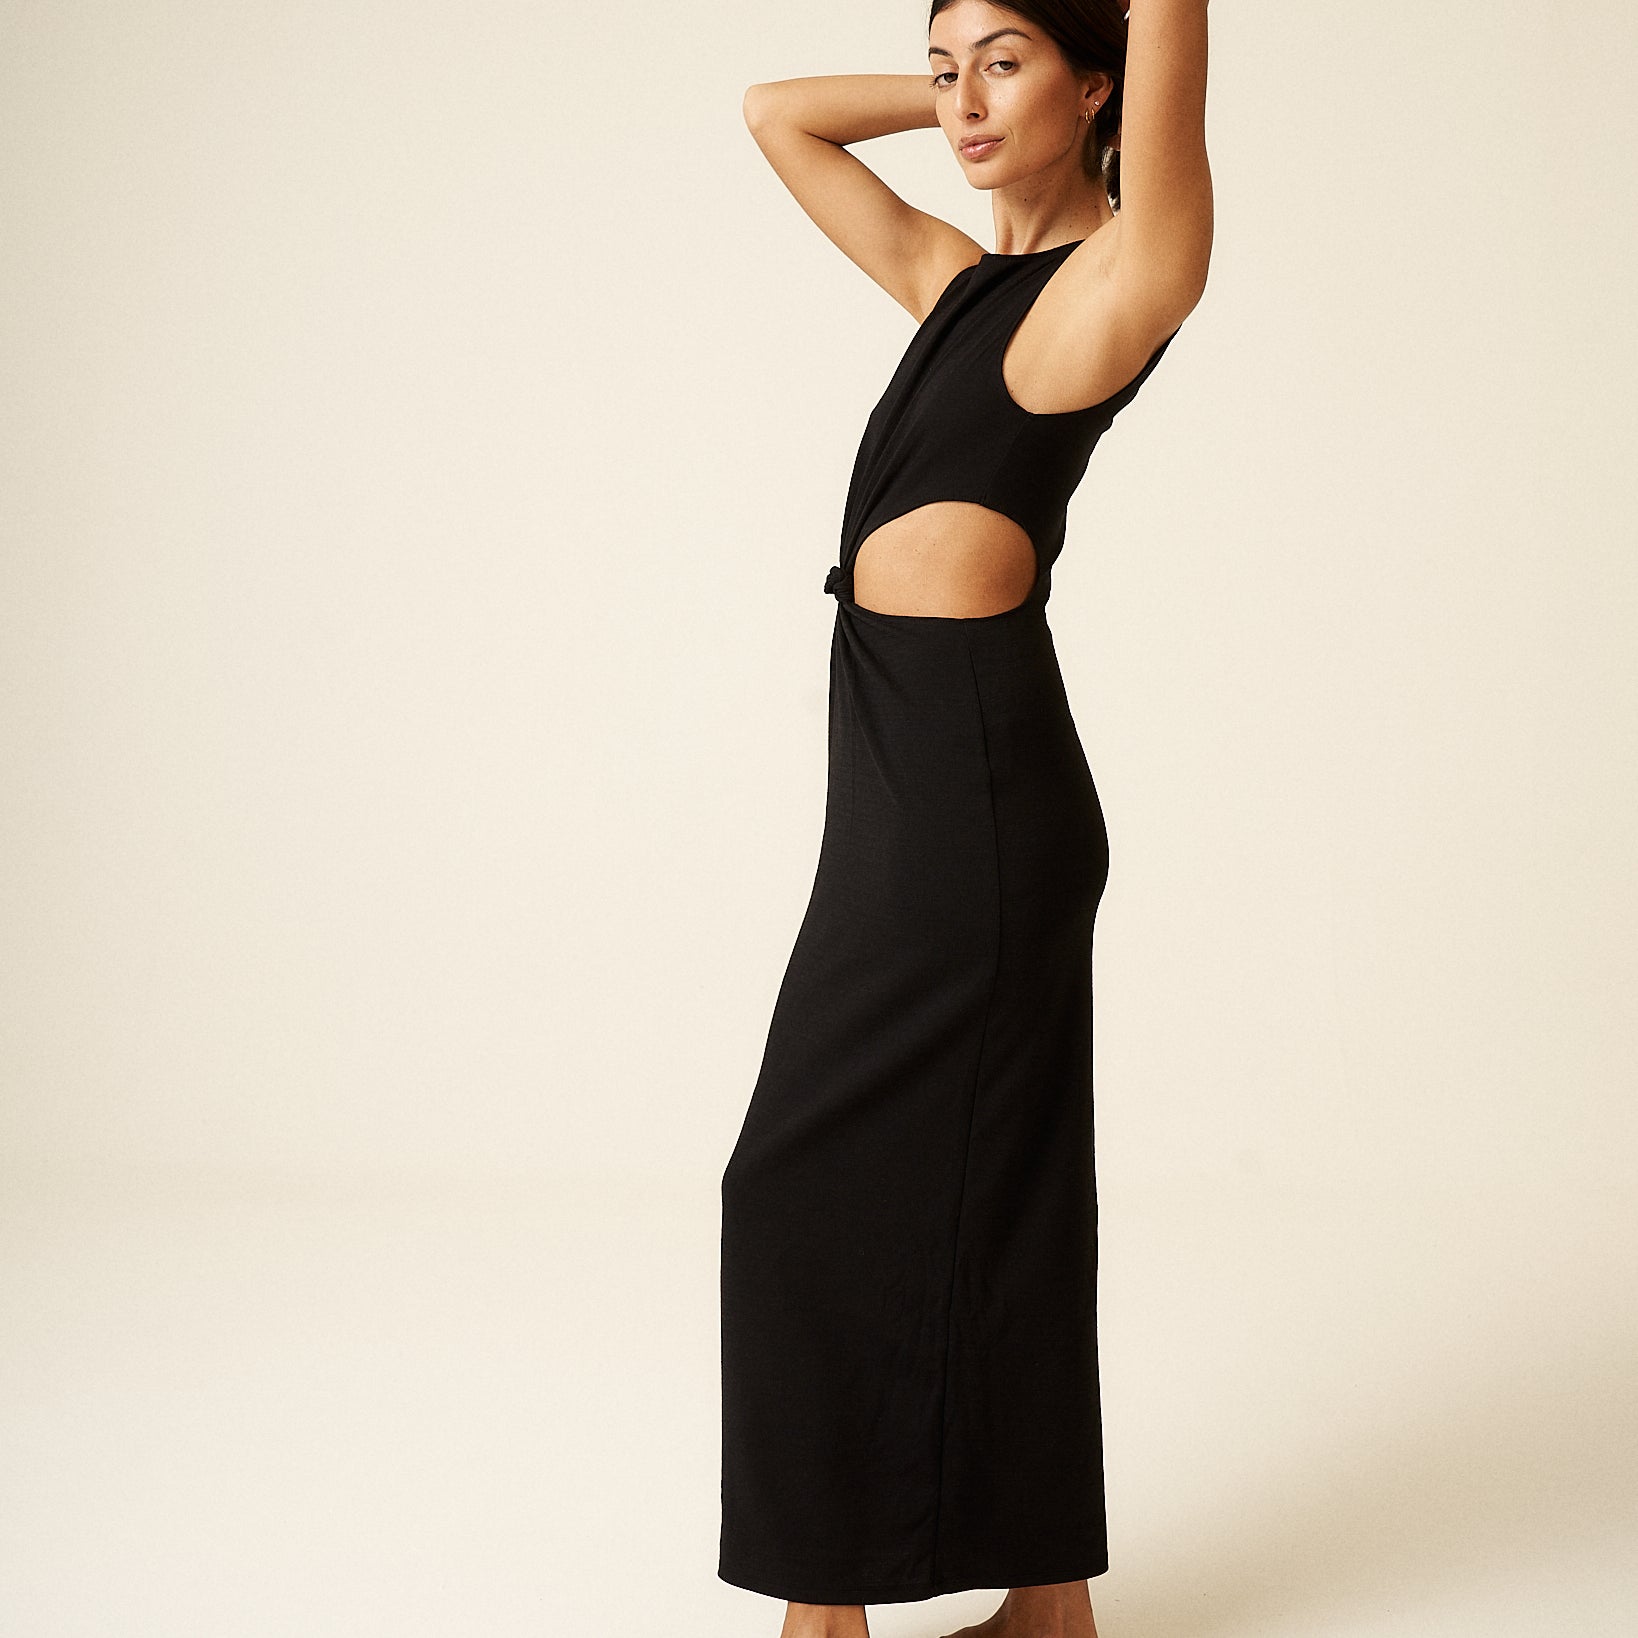 Alana. Sustainable knotted dress made of merino wool, black color. Length to the ankles and cut out at the sides.